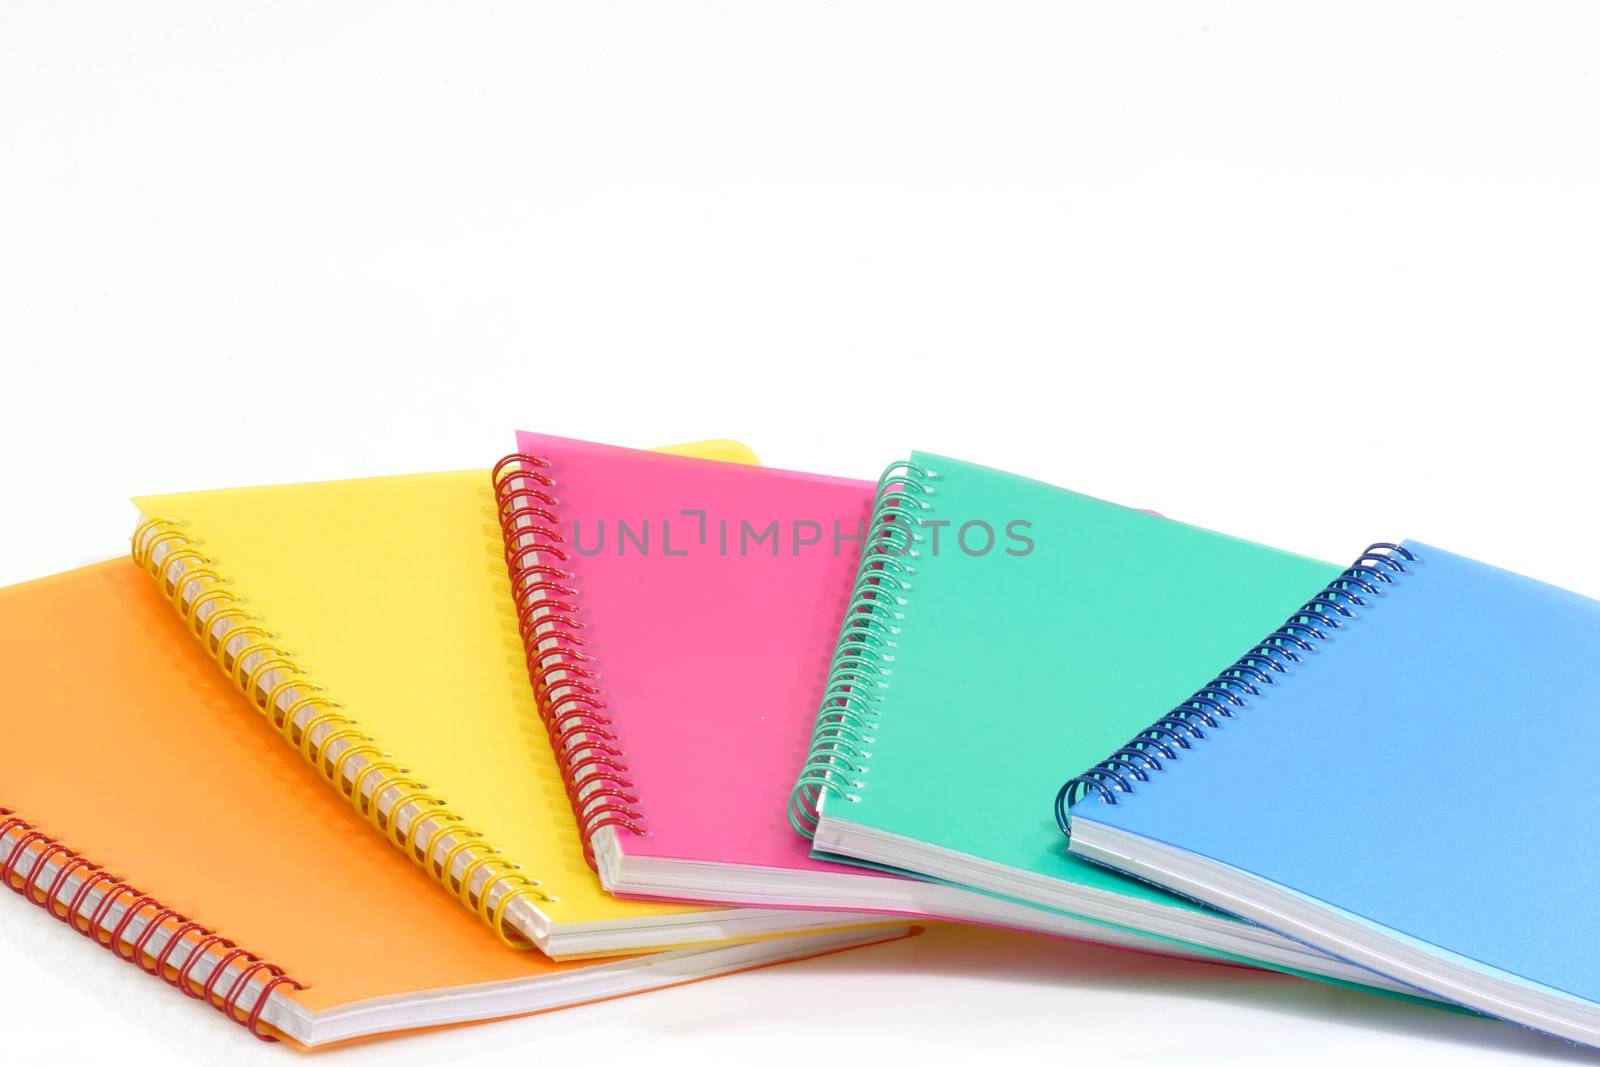 Colorful ring bound books that are isolated on white Background.